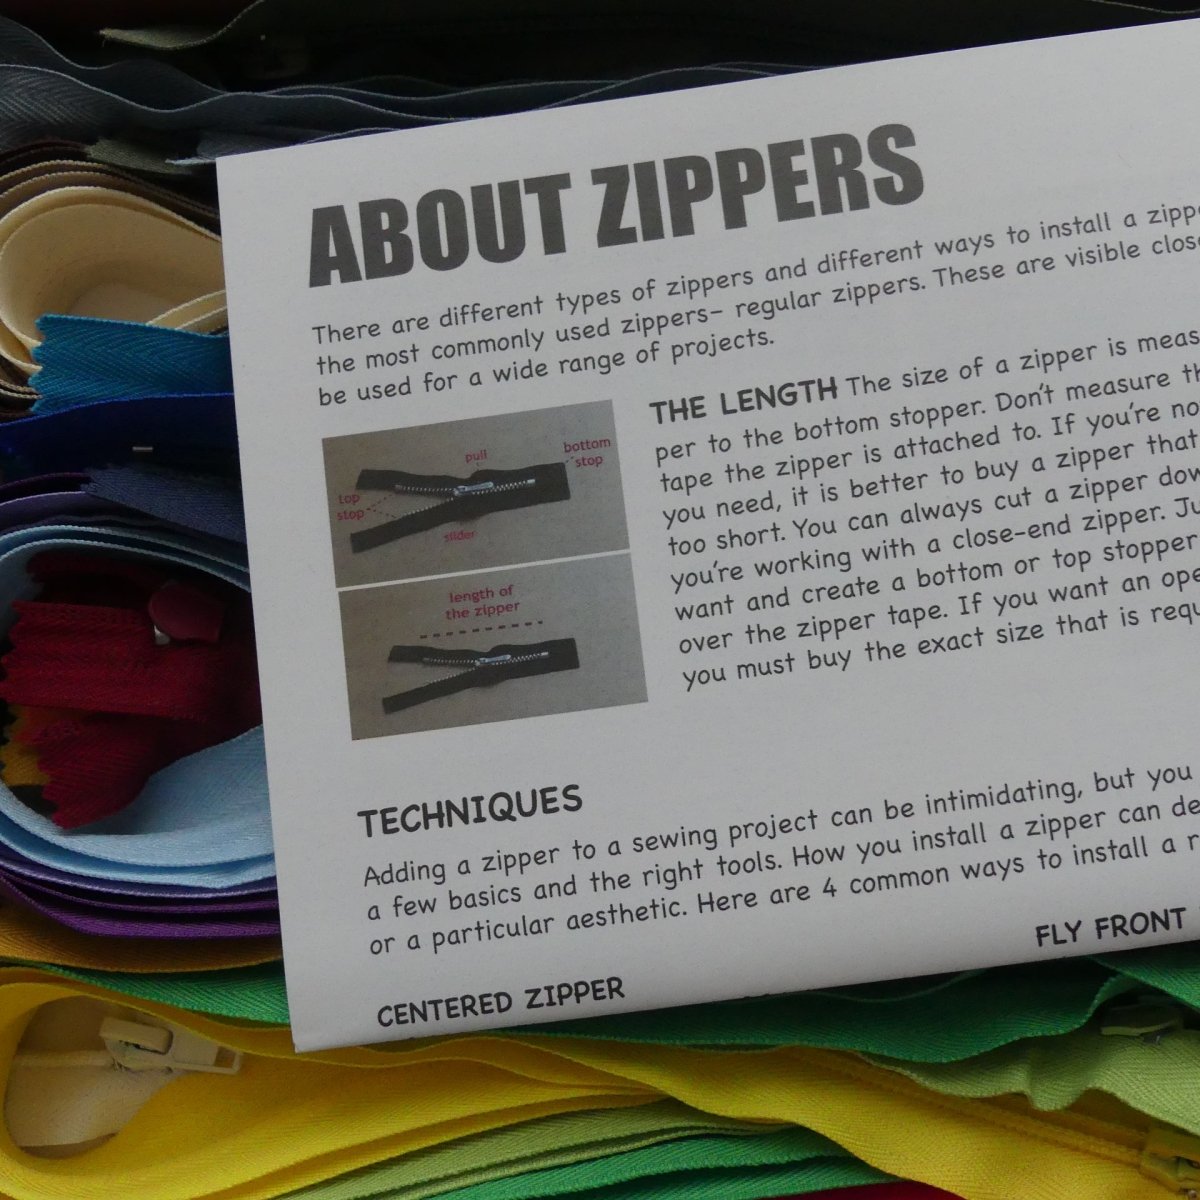 Instructions about zippers and how to sew them